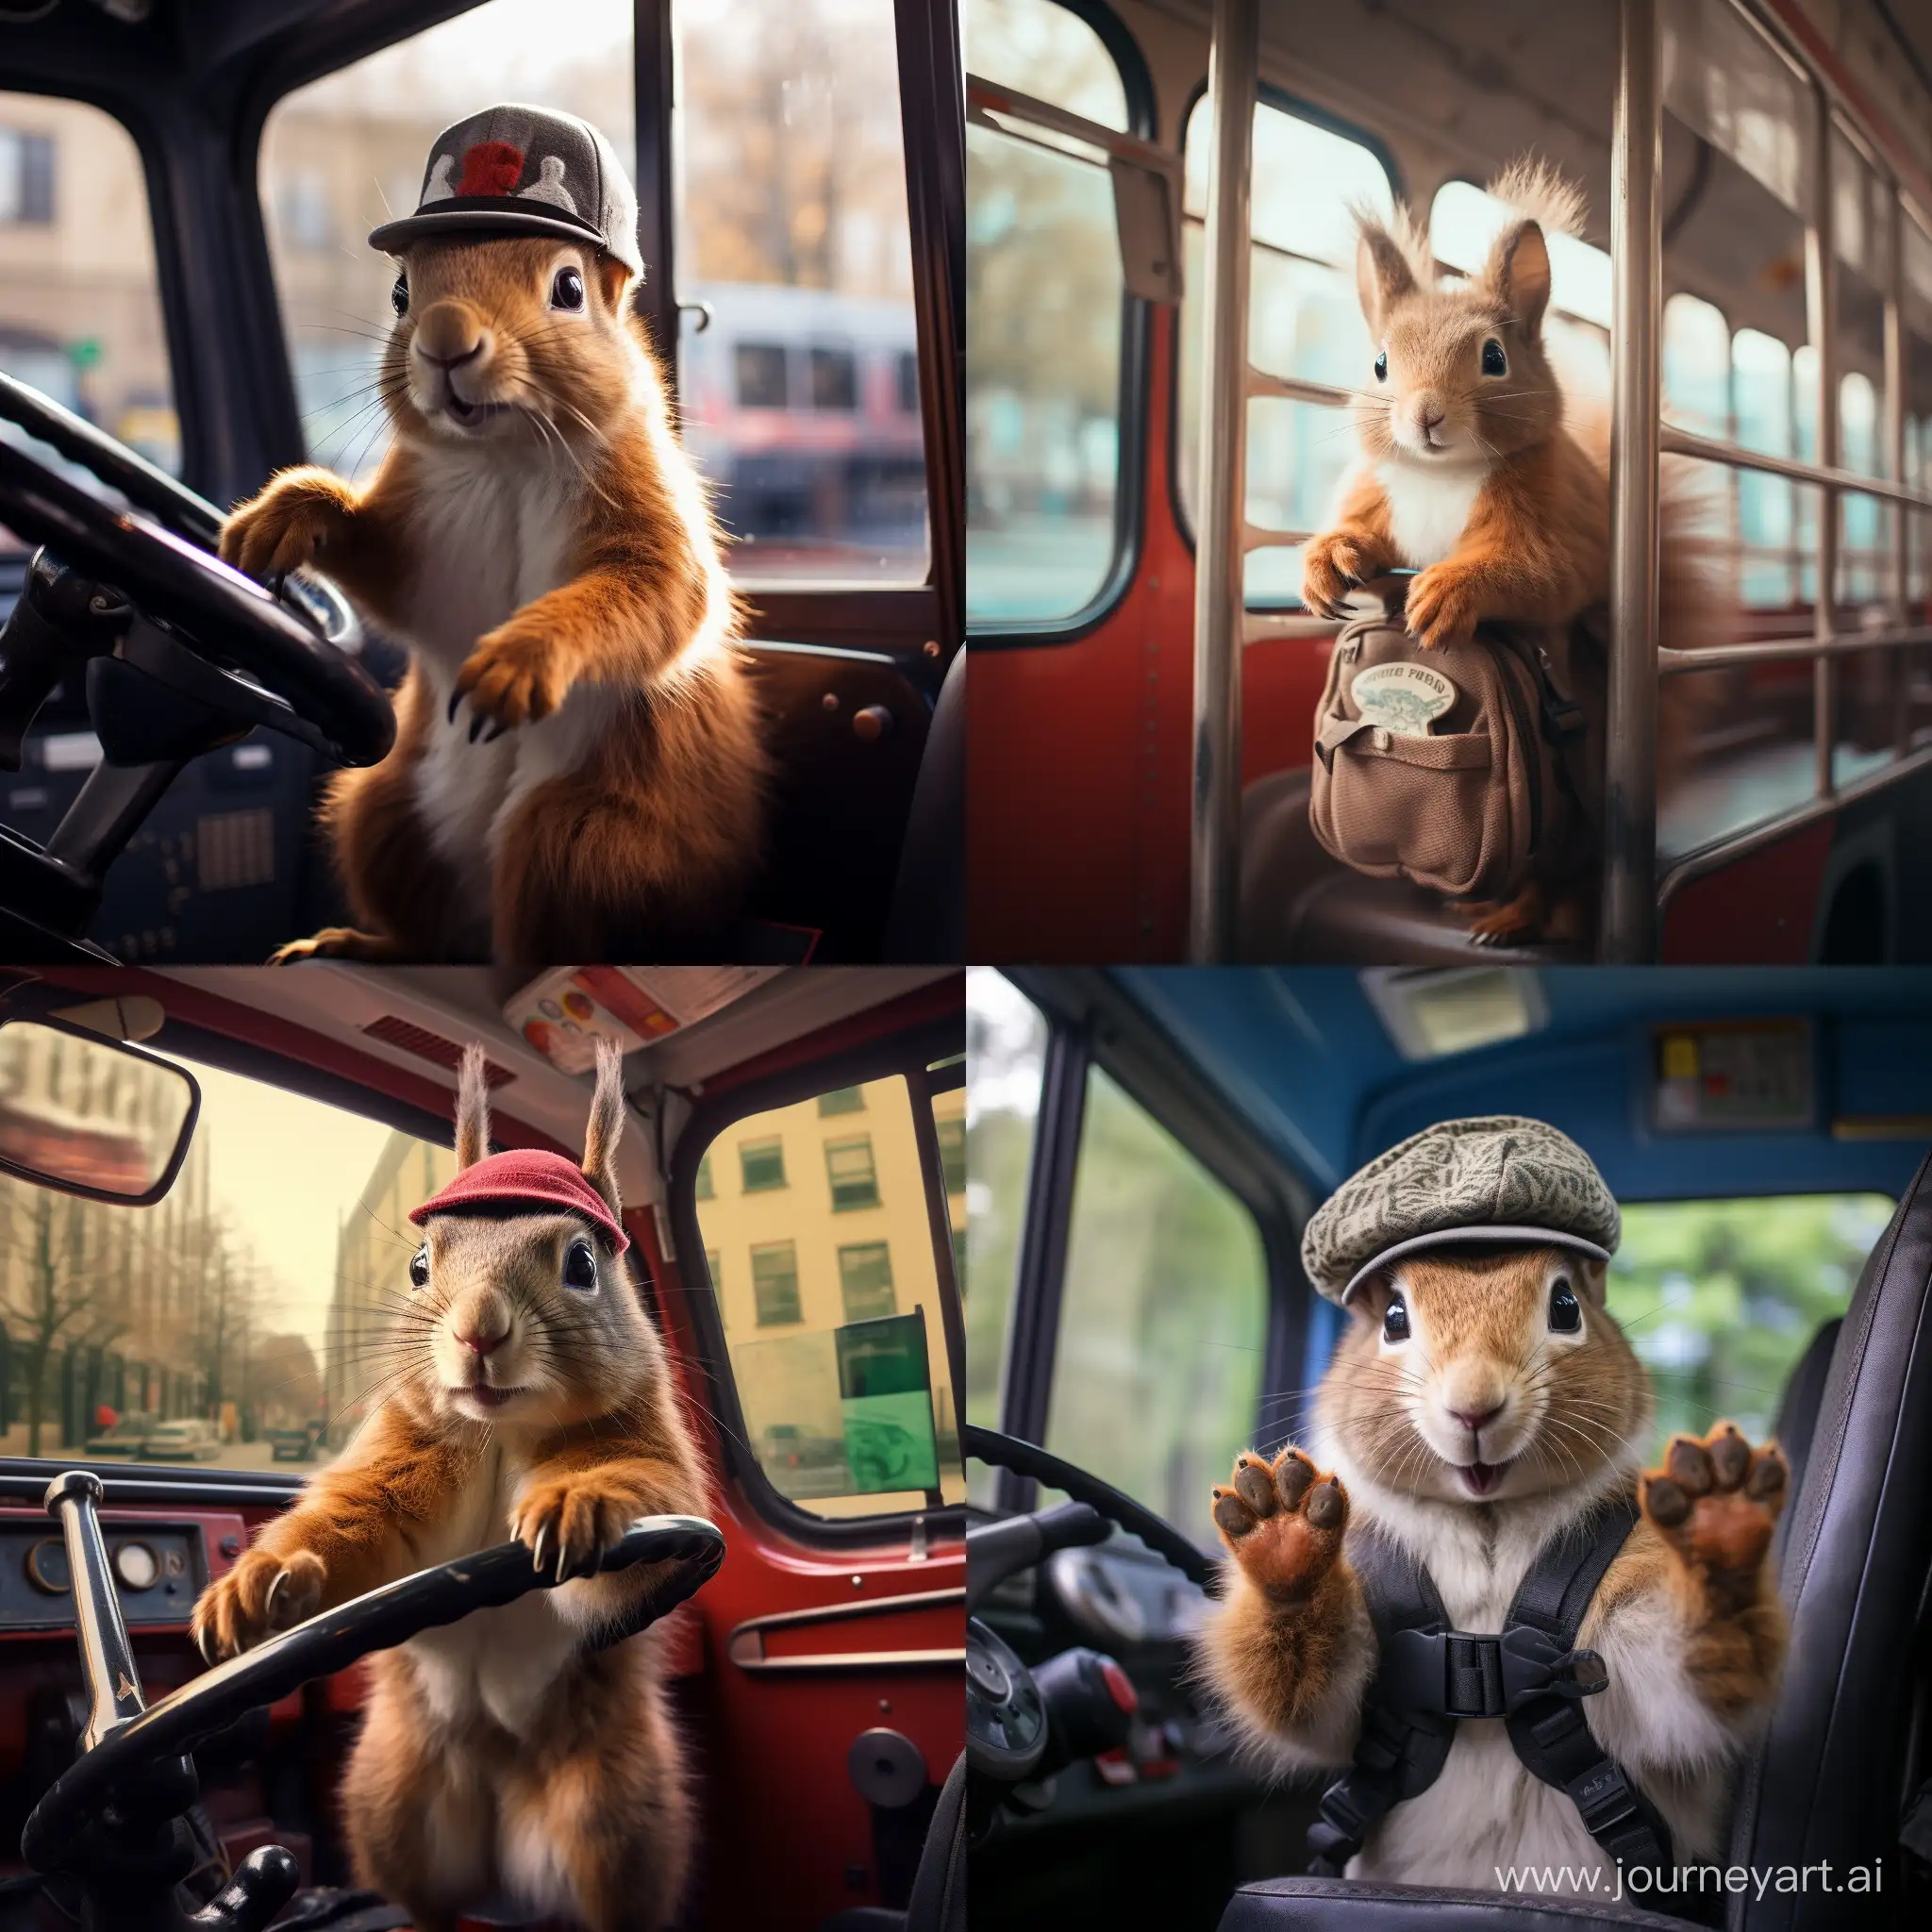 Squirrel-Driving-Bus-in-Playful-Artistic-Representation